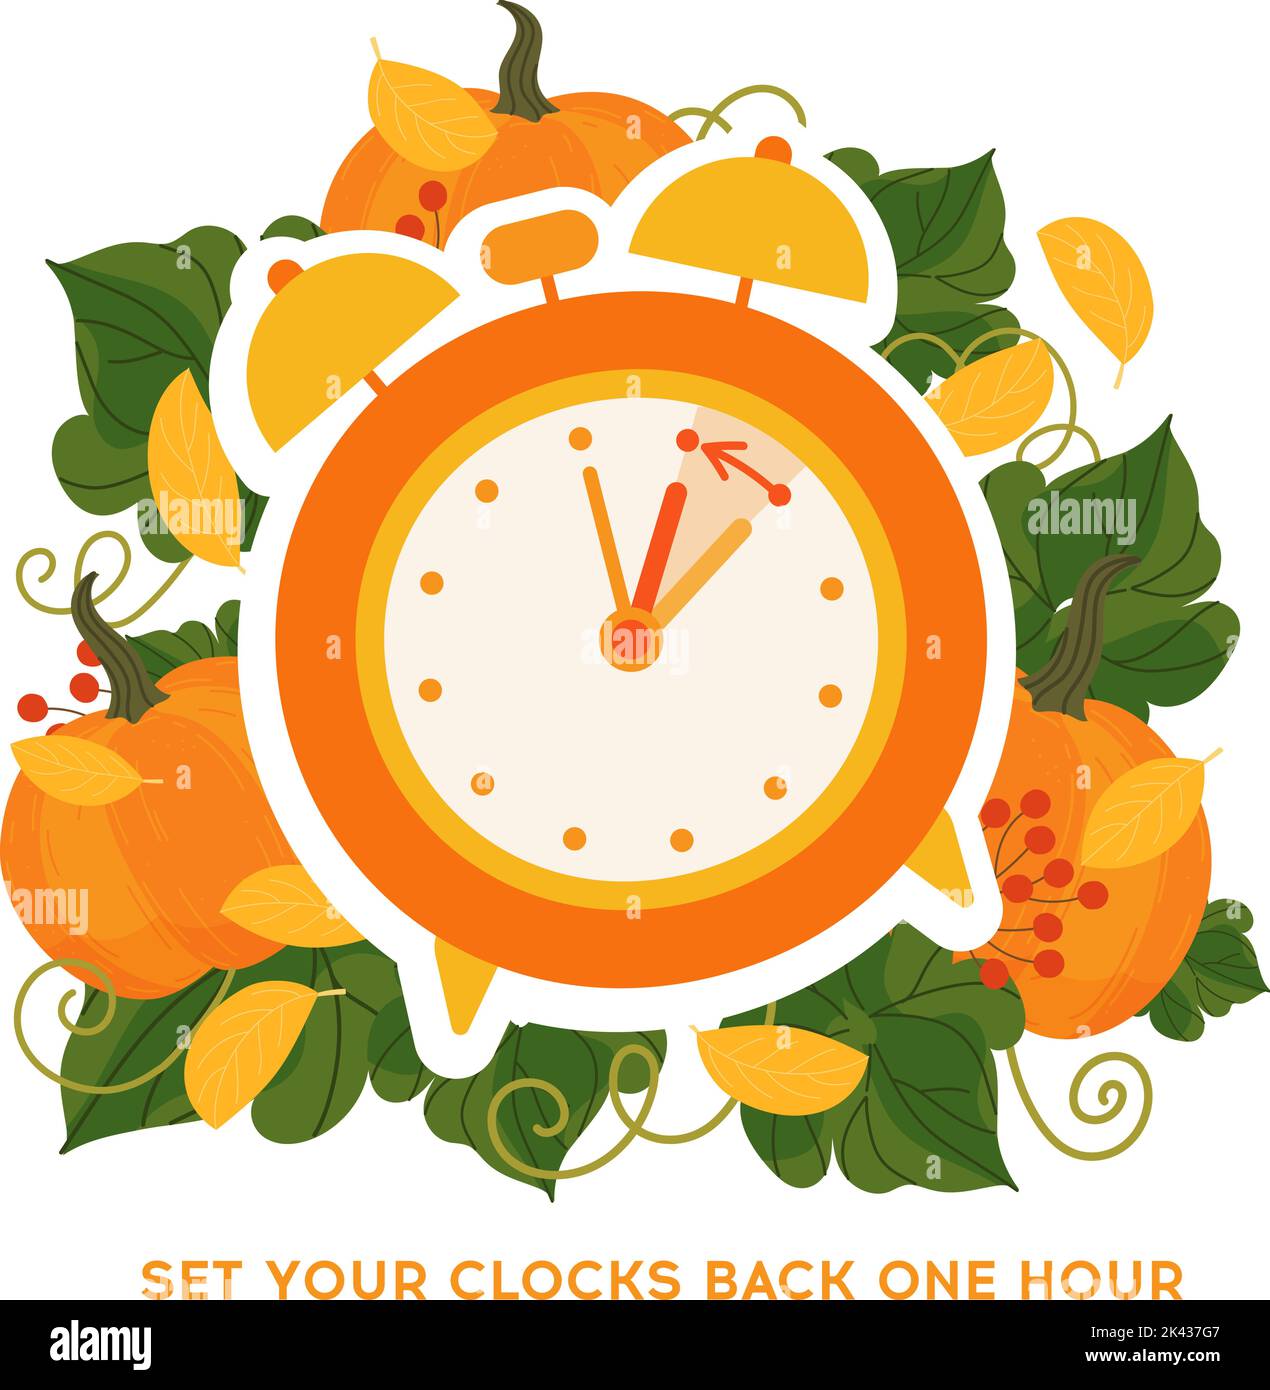 Fall back time concept banner. Clock on the fall background with pumpkins and autumn leaves. The handles of clock turn back on hour. Daylight saving t Stock Vector